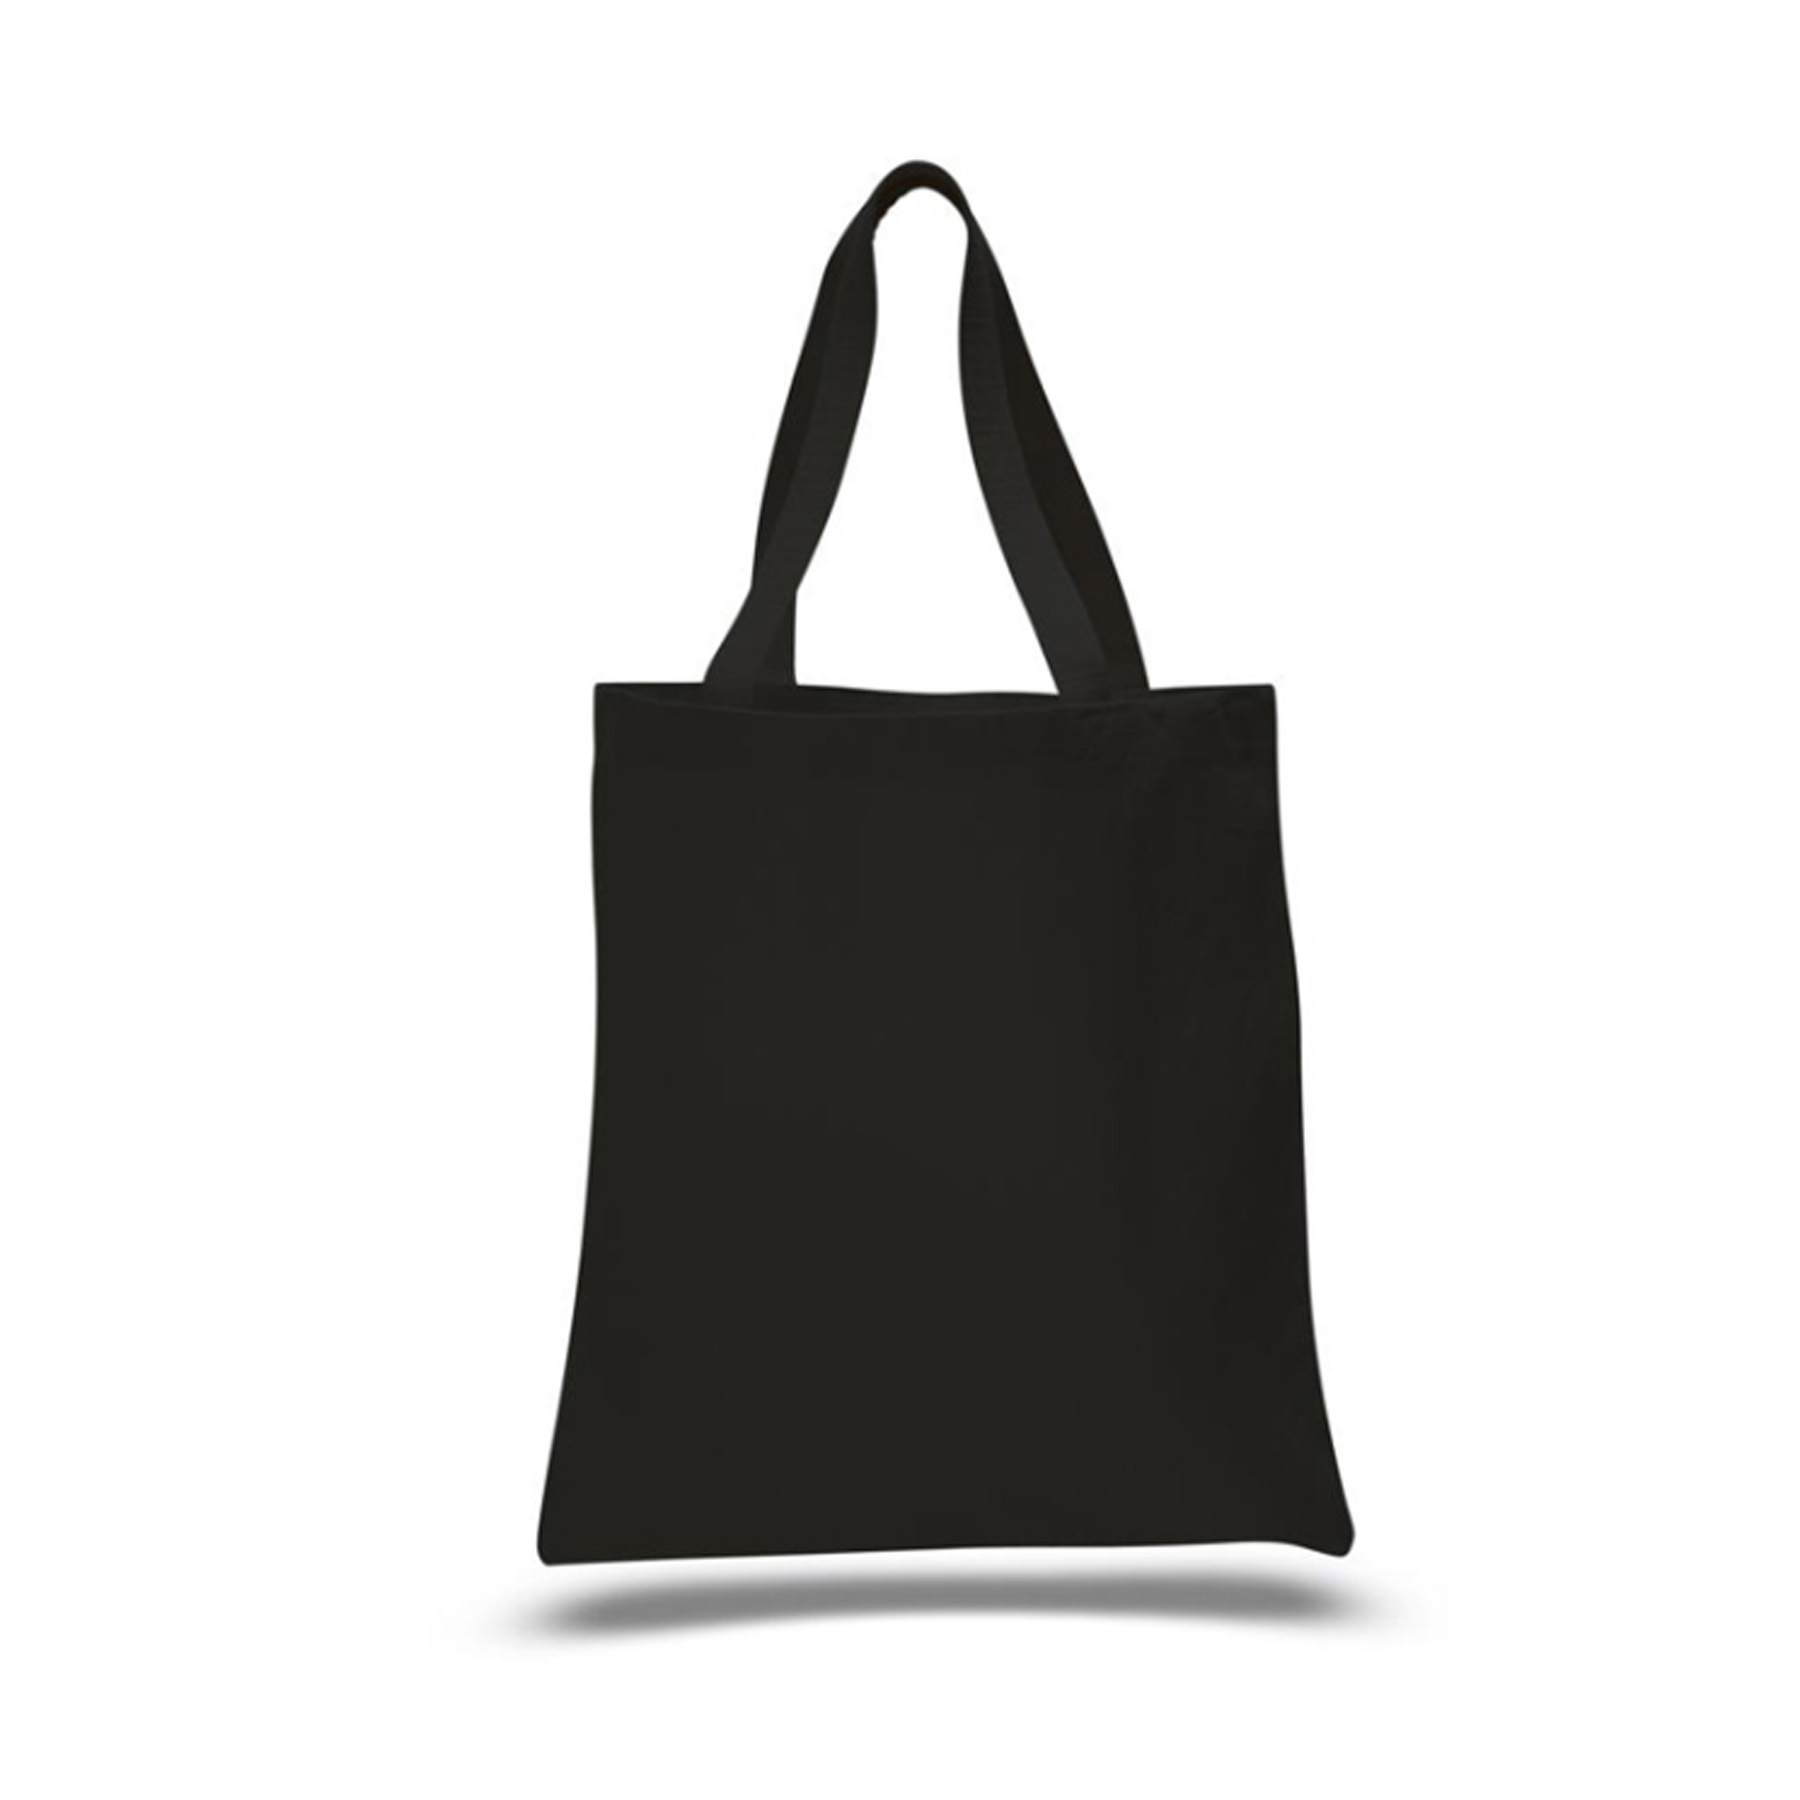 Promotional Cotton Tote Bag